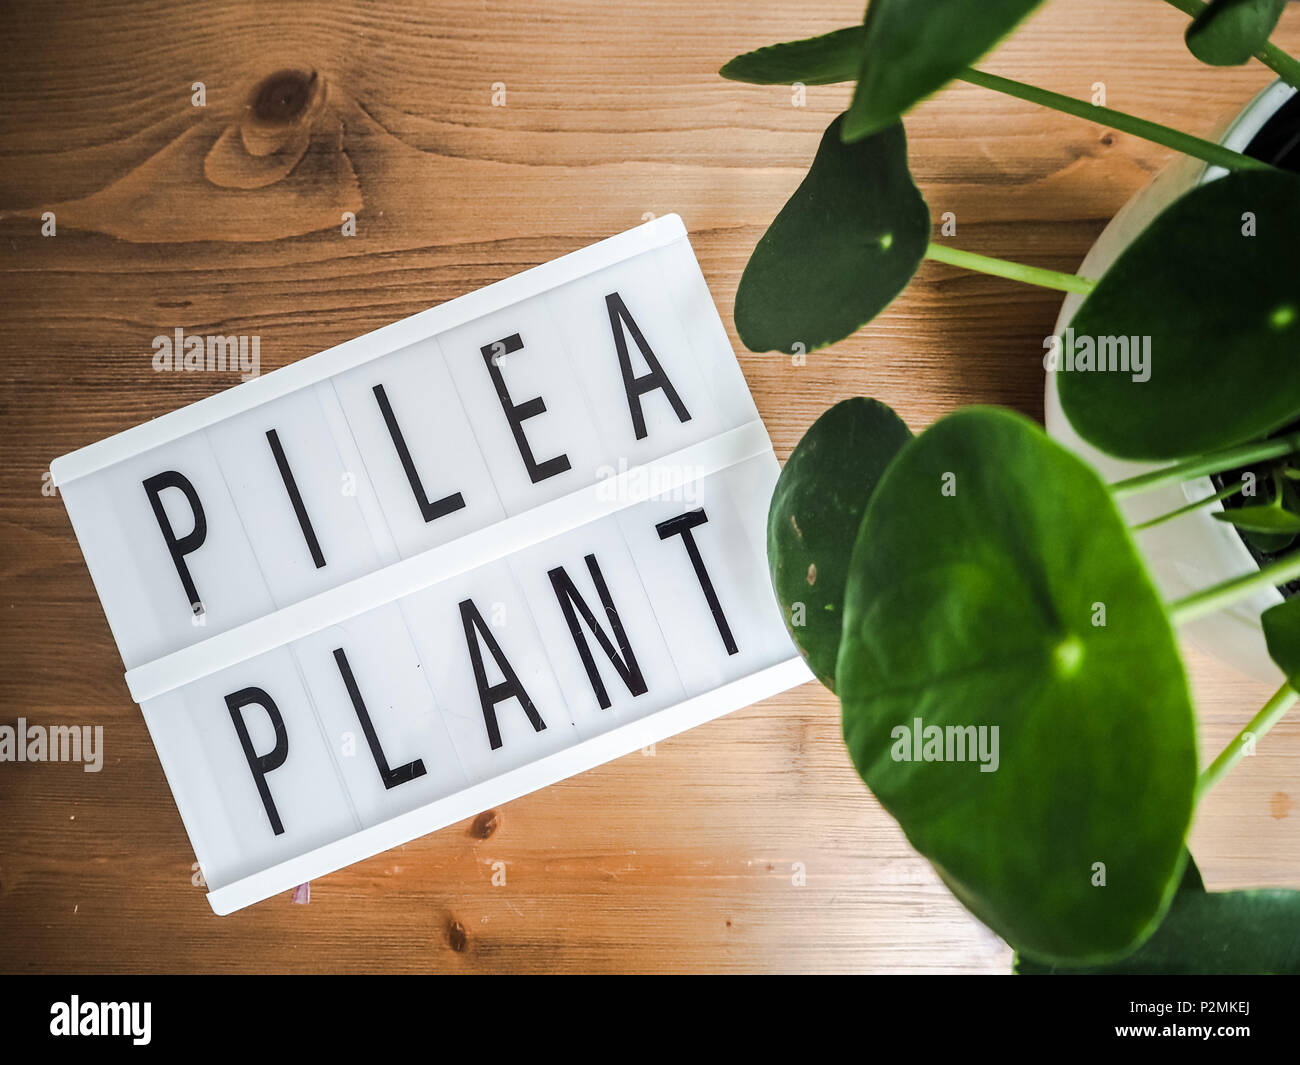 Pilea peperomioides or pancake plant ( urticaceae) with a lightbox on a wooden table Stock Photo